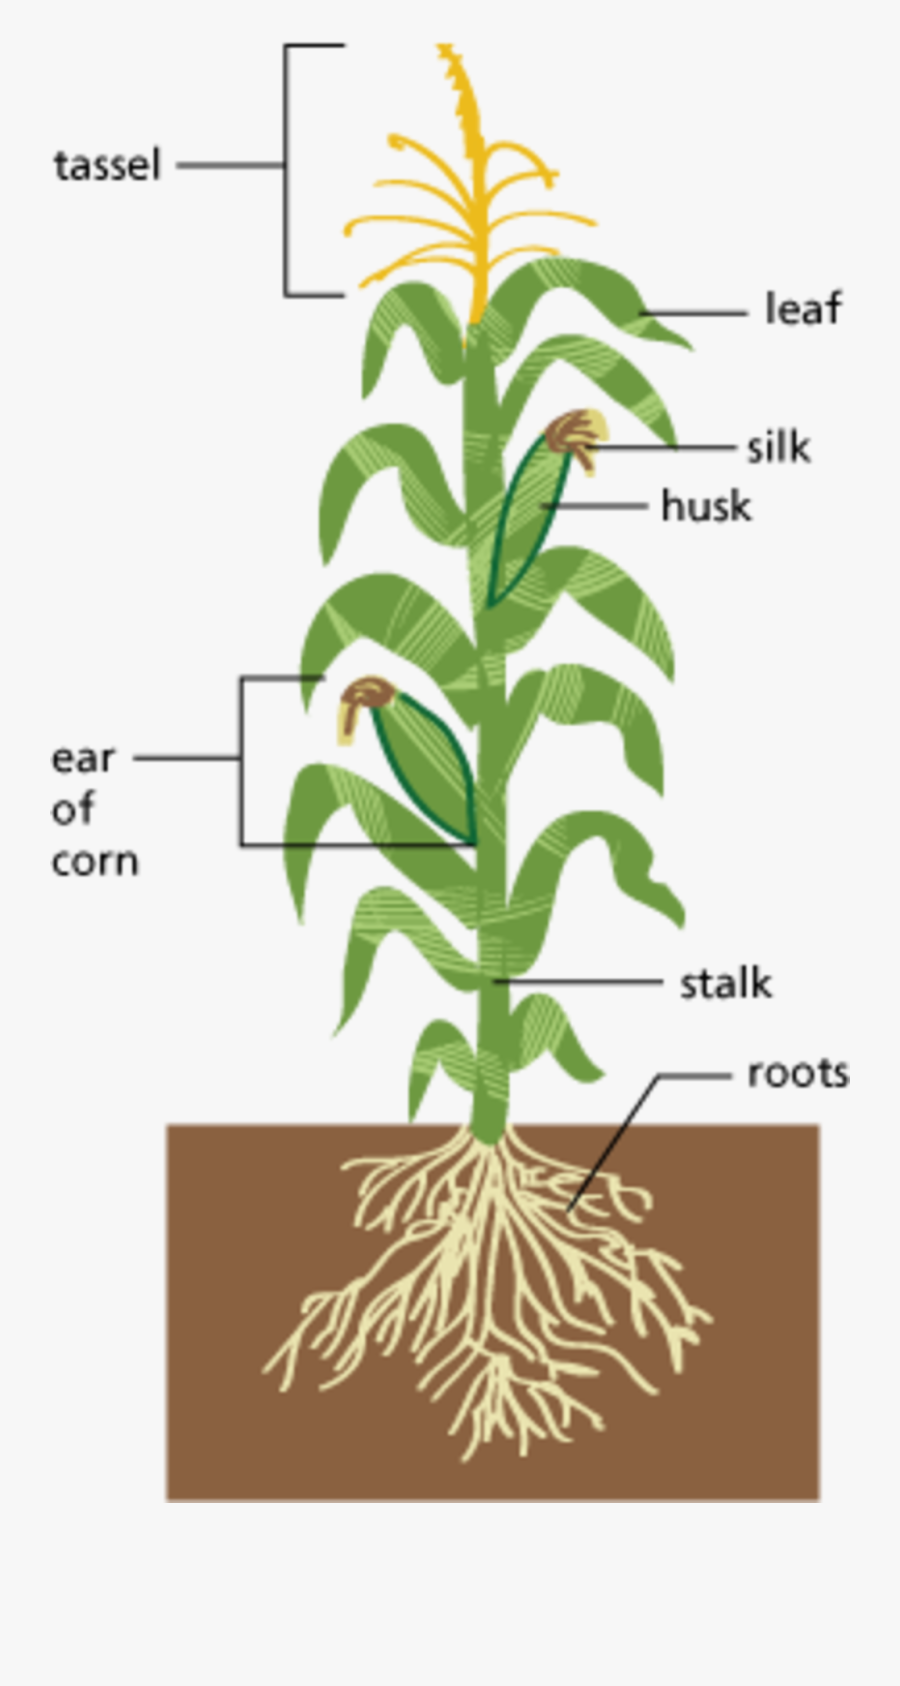 Image Of Edible Parts Of A Plant Diagram Large Size - Diagram Of A Corn